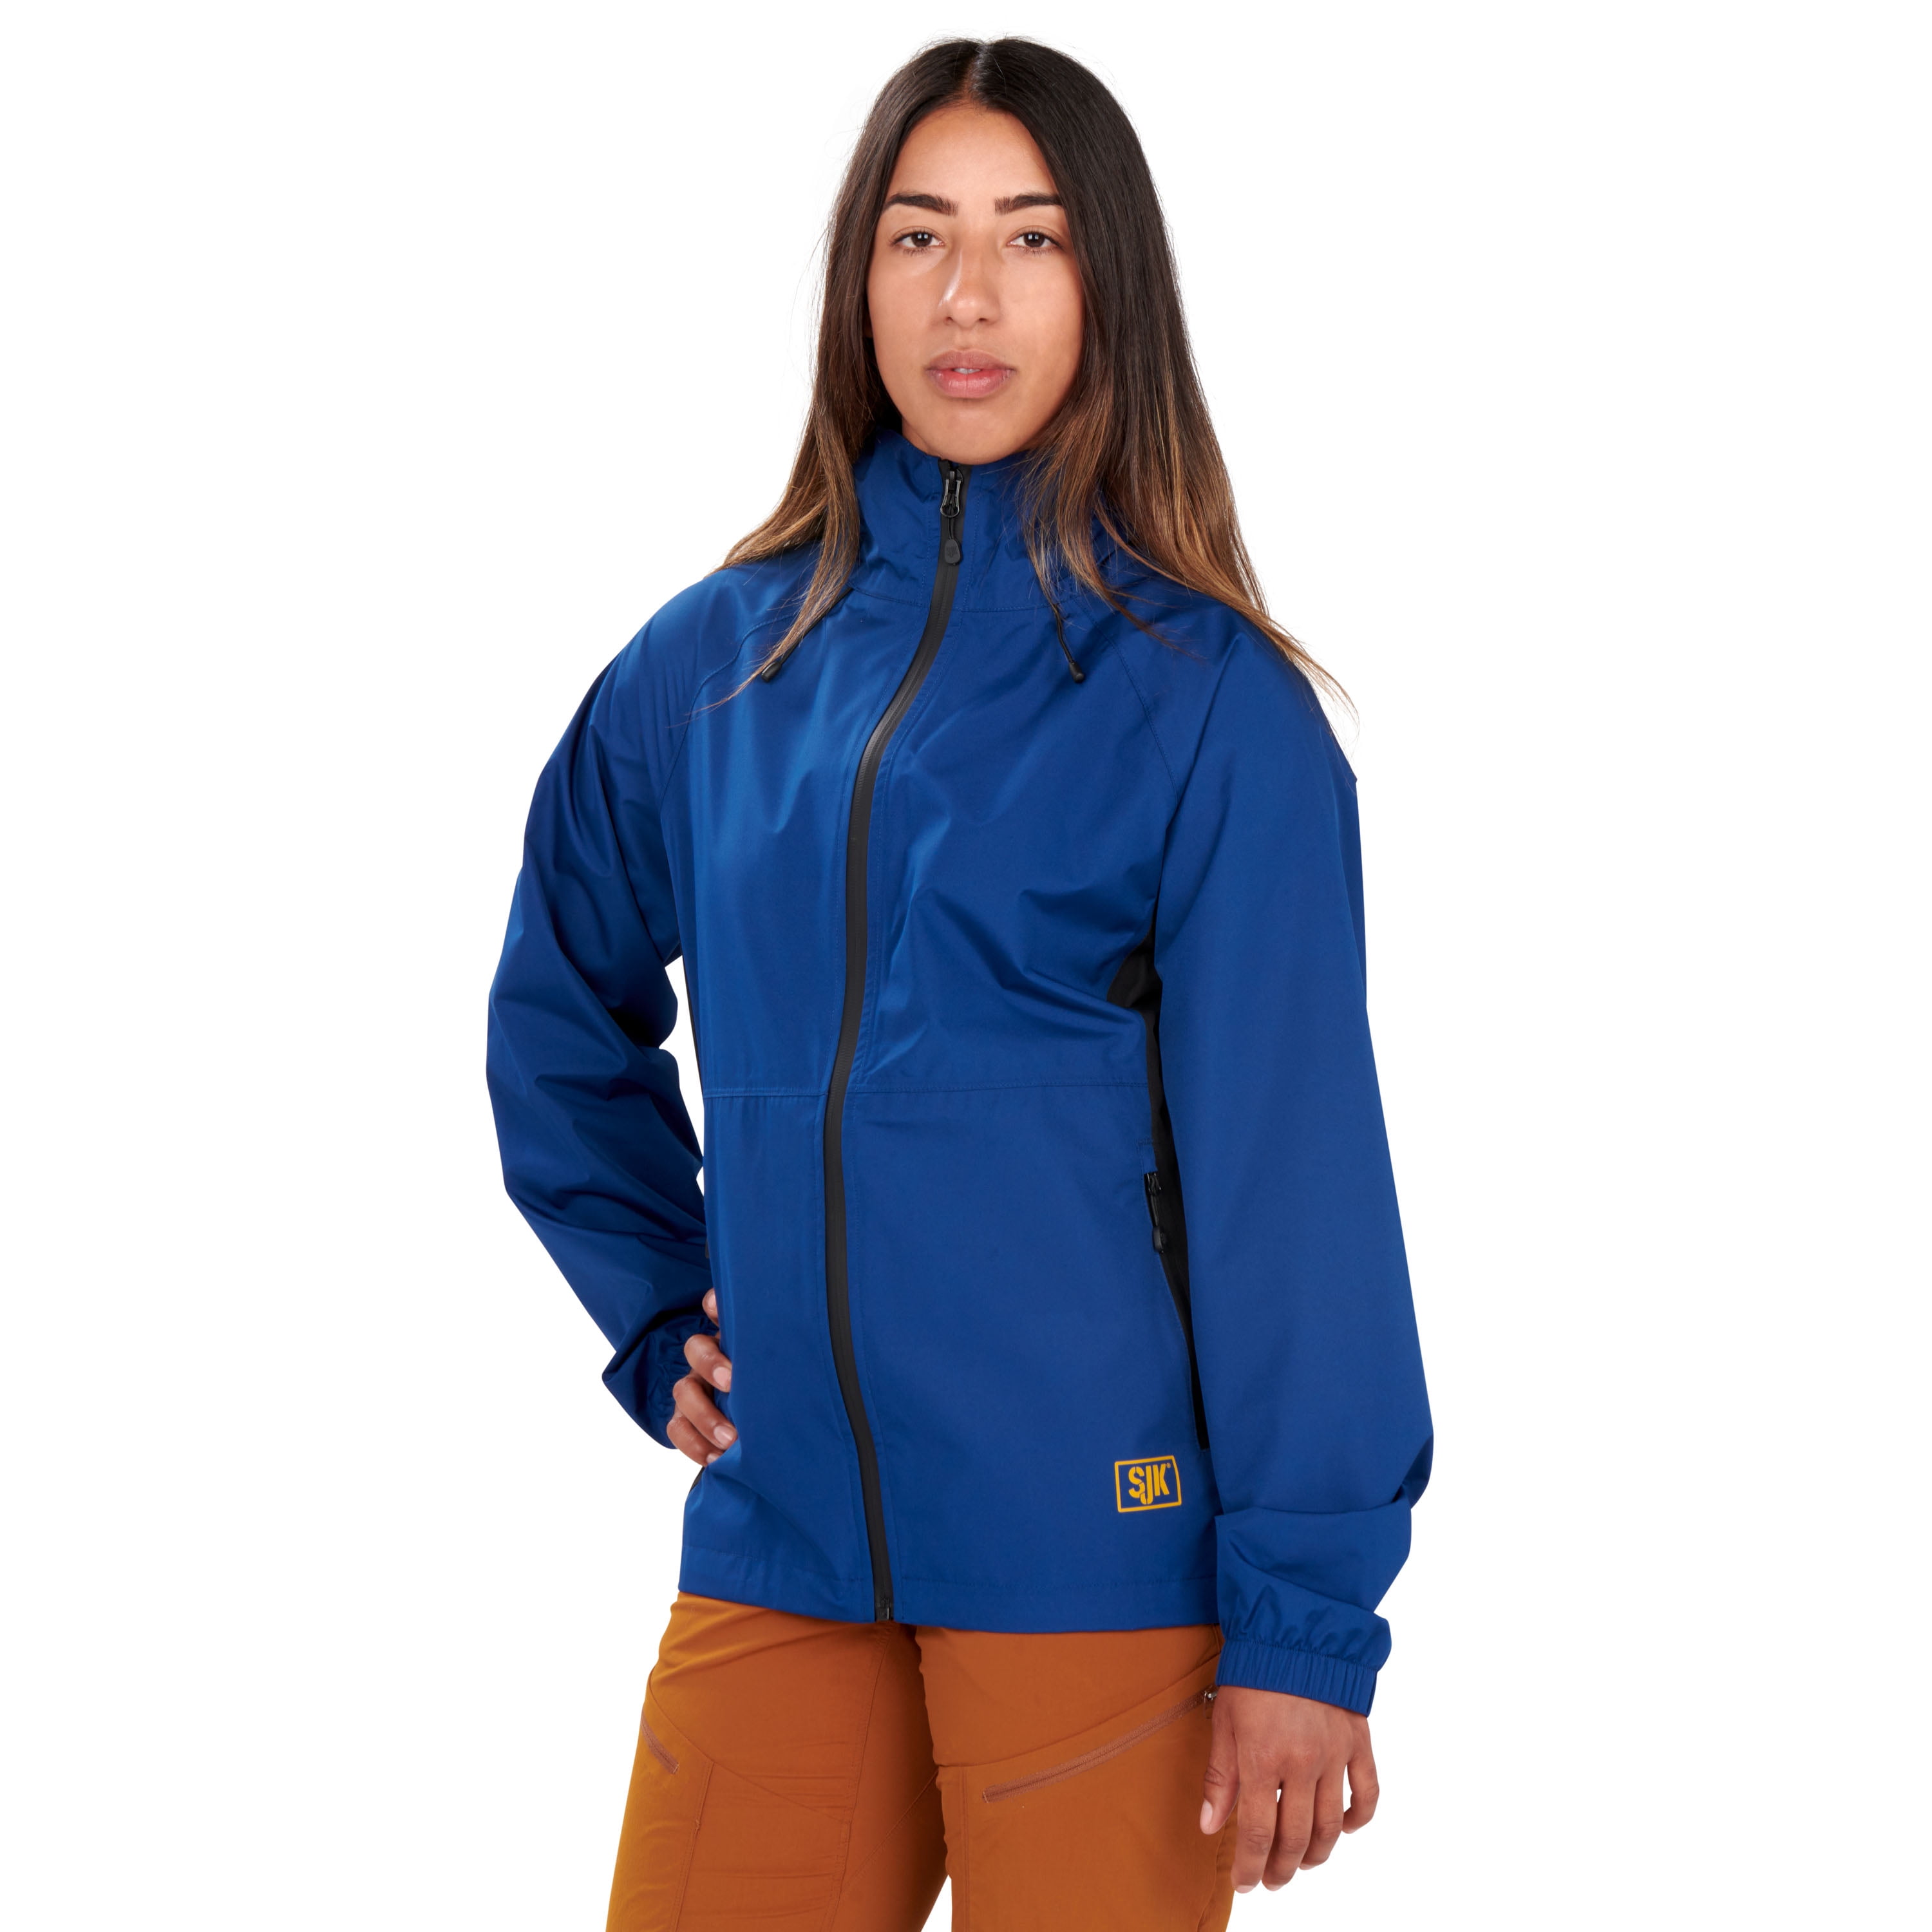 Frogg Toggs RT62540-732LG Women's River Toad Jacket Charcoal/ElectricBlue LARGE